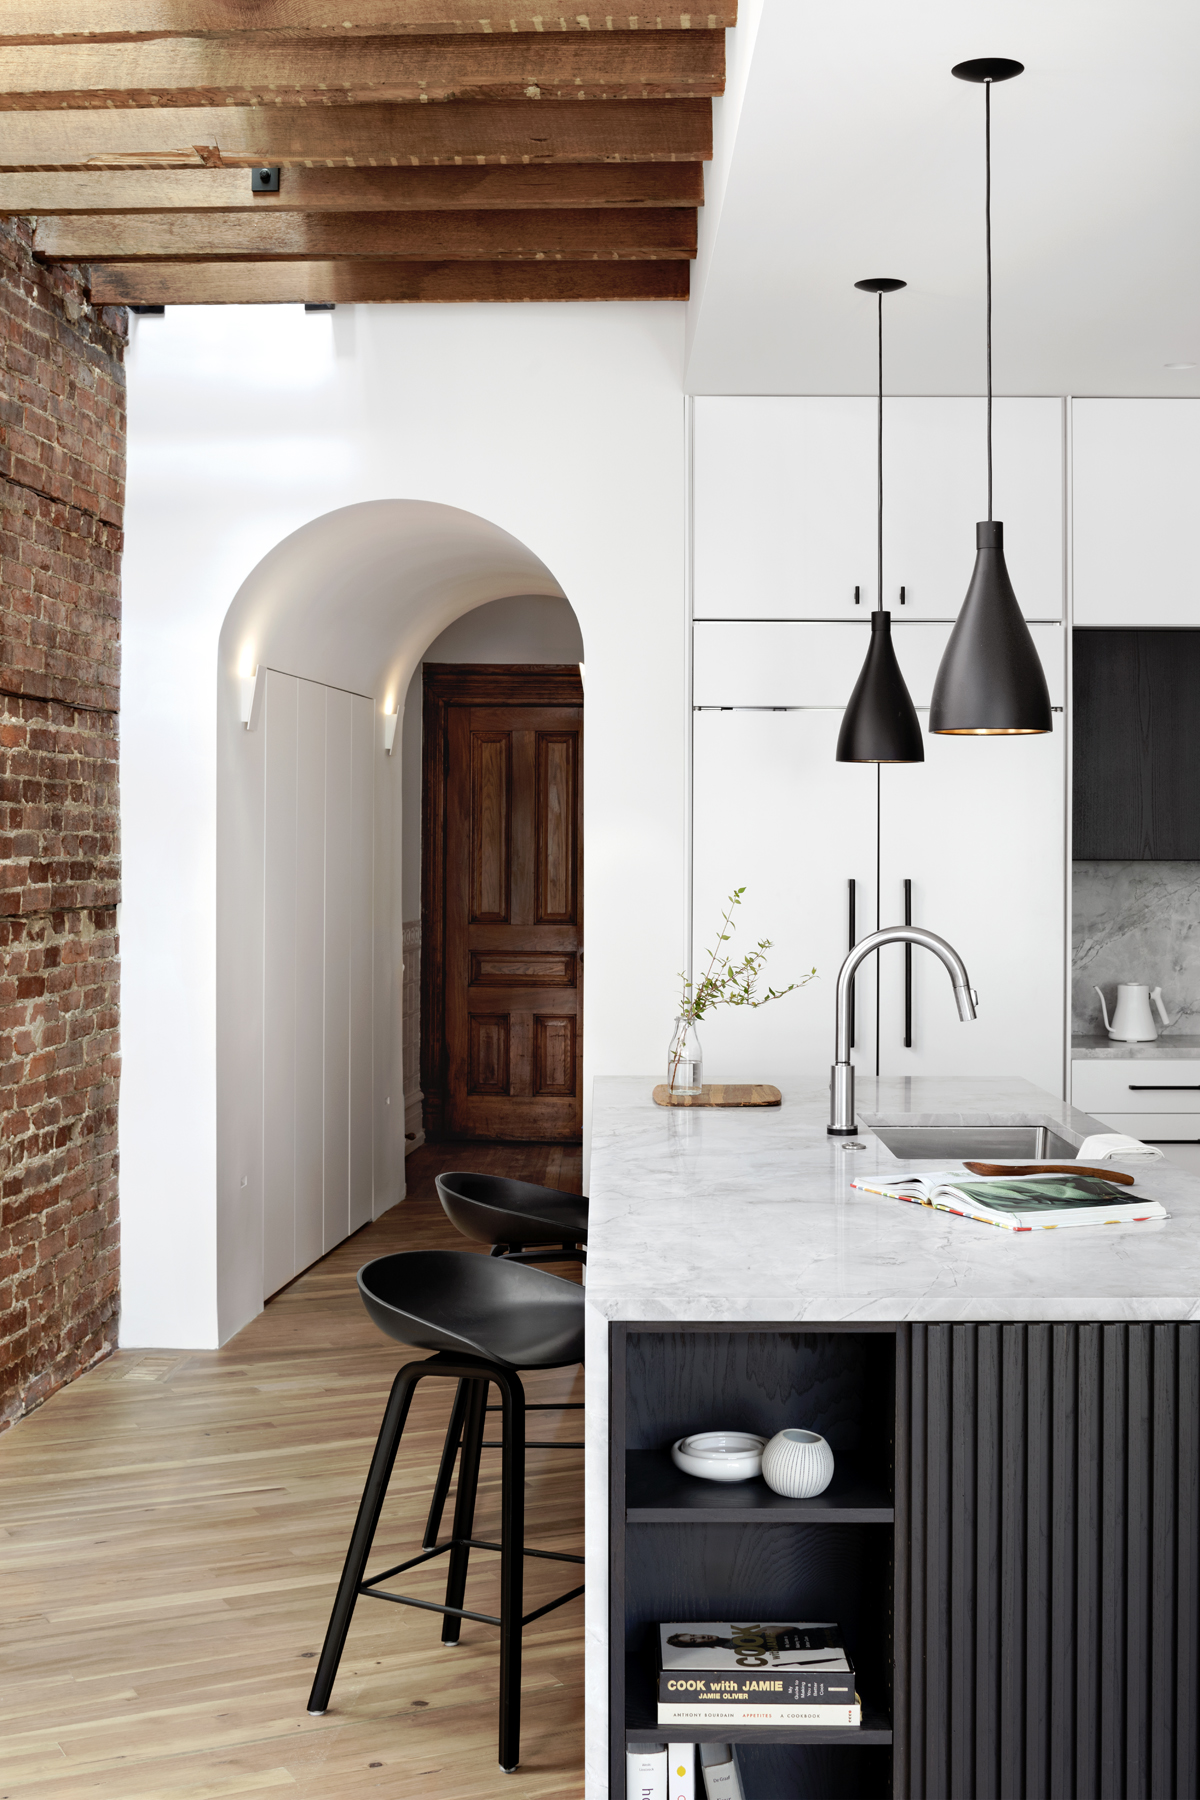 Modern kitchen with historic elements - view toward a sculpted kitchen entryway